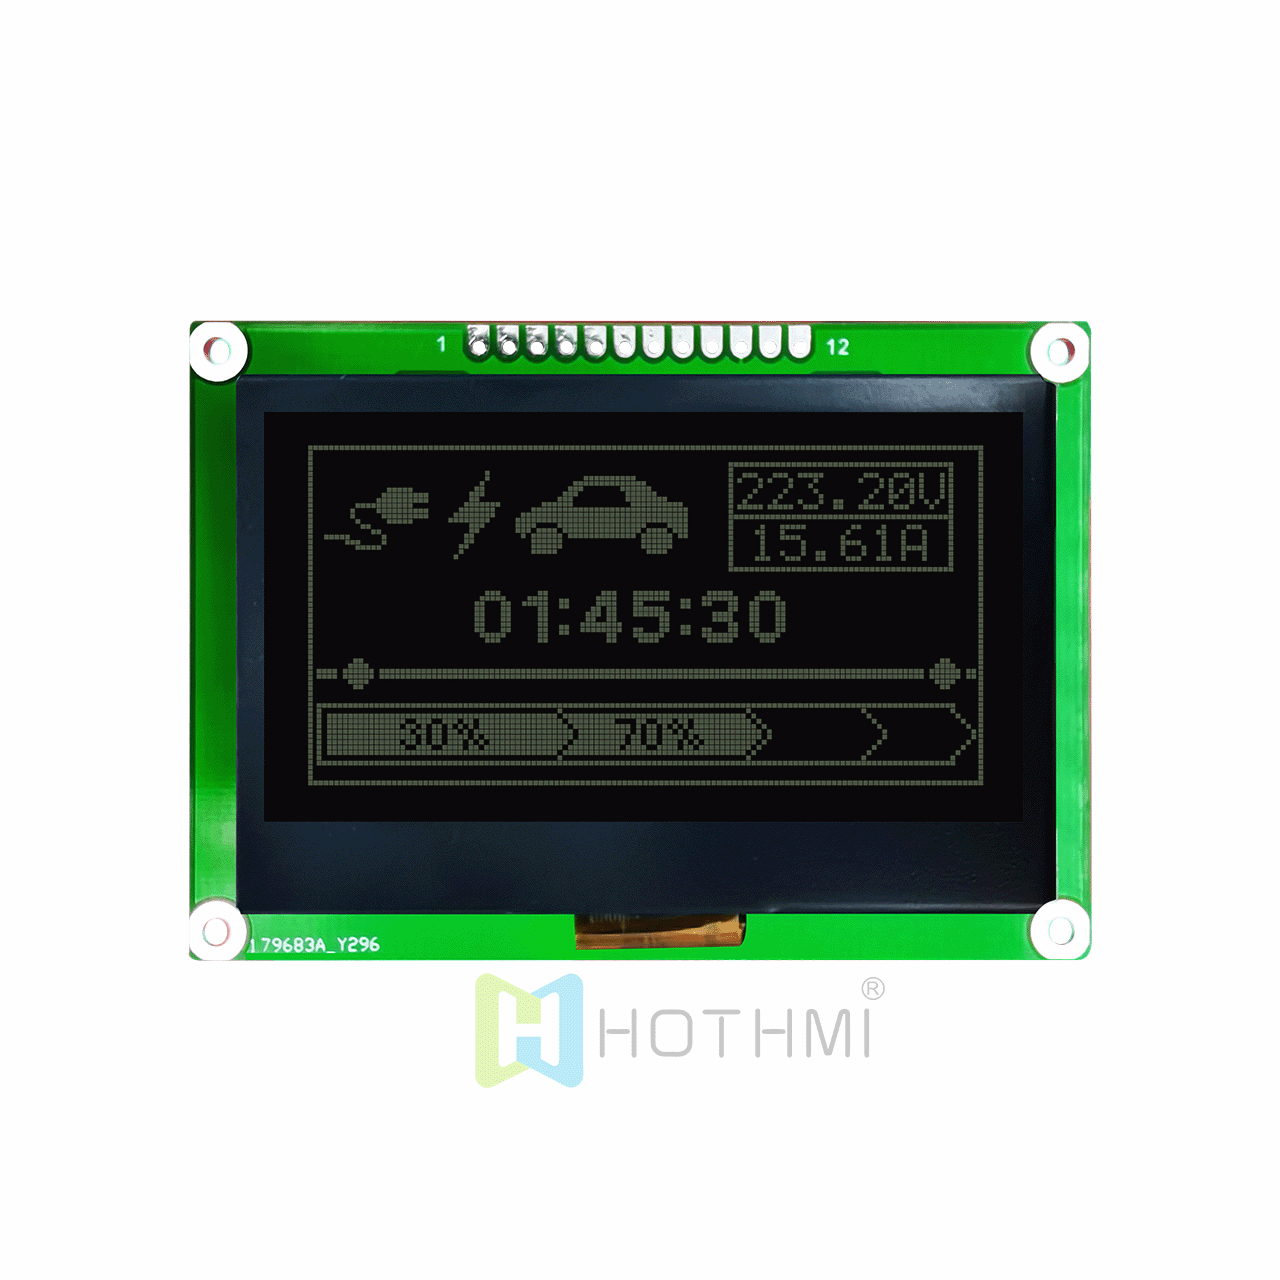 2.7-inch 128 x 64 graphic LCD module/LCM128x64 graphic dot matrix module/white text on black background/ST7567 controller